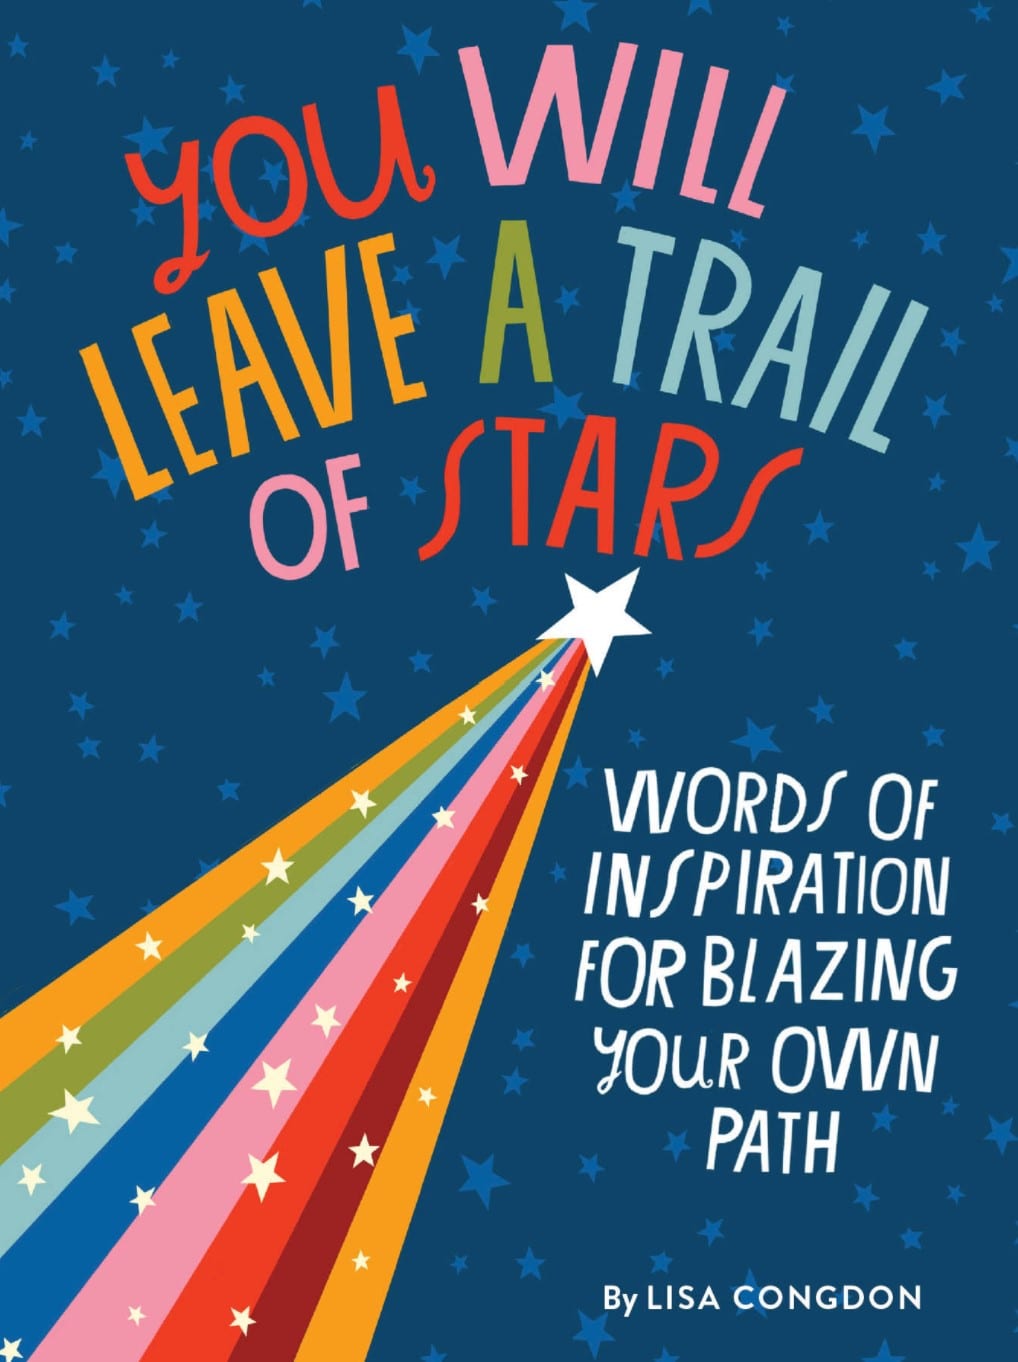 You Will Leave a Trail of Stars book cover